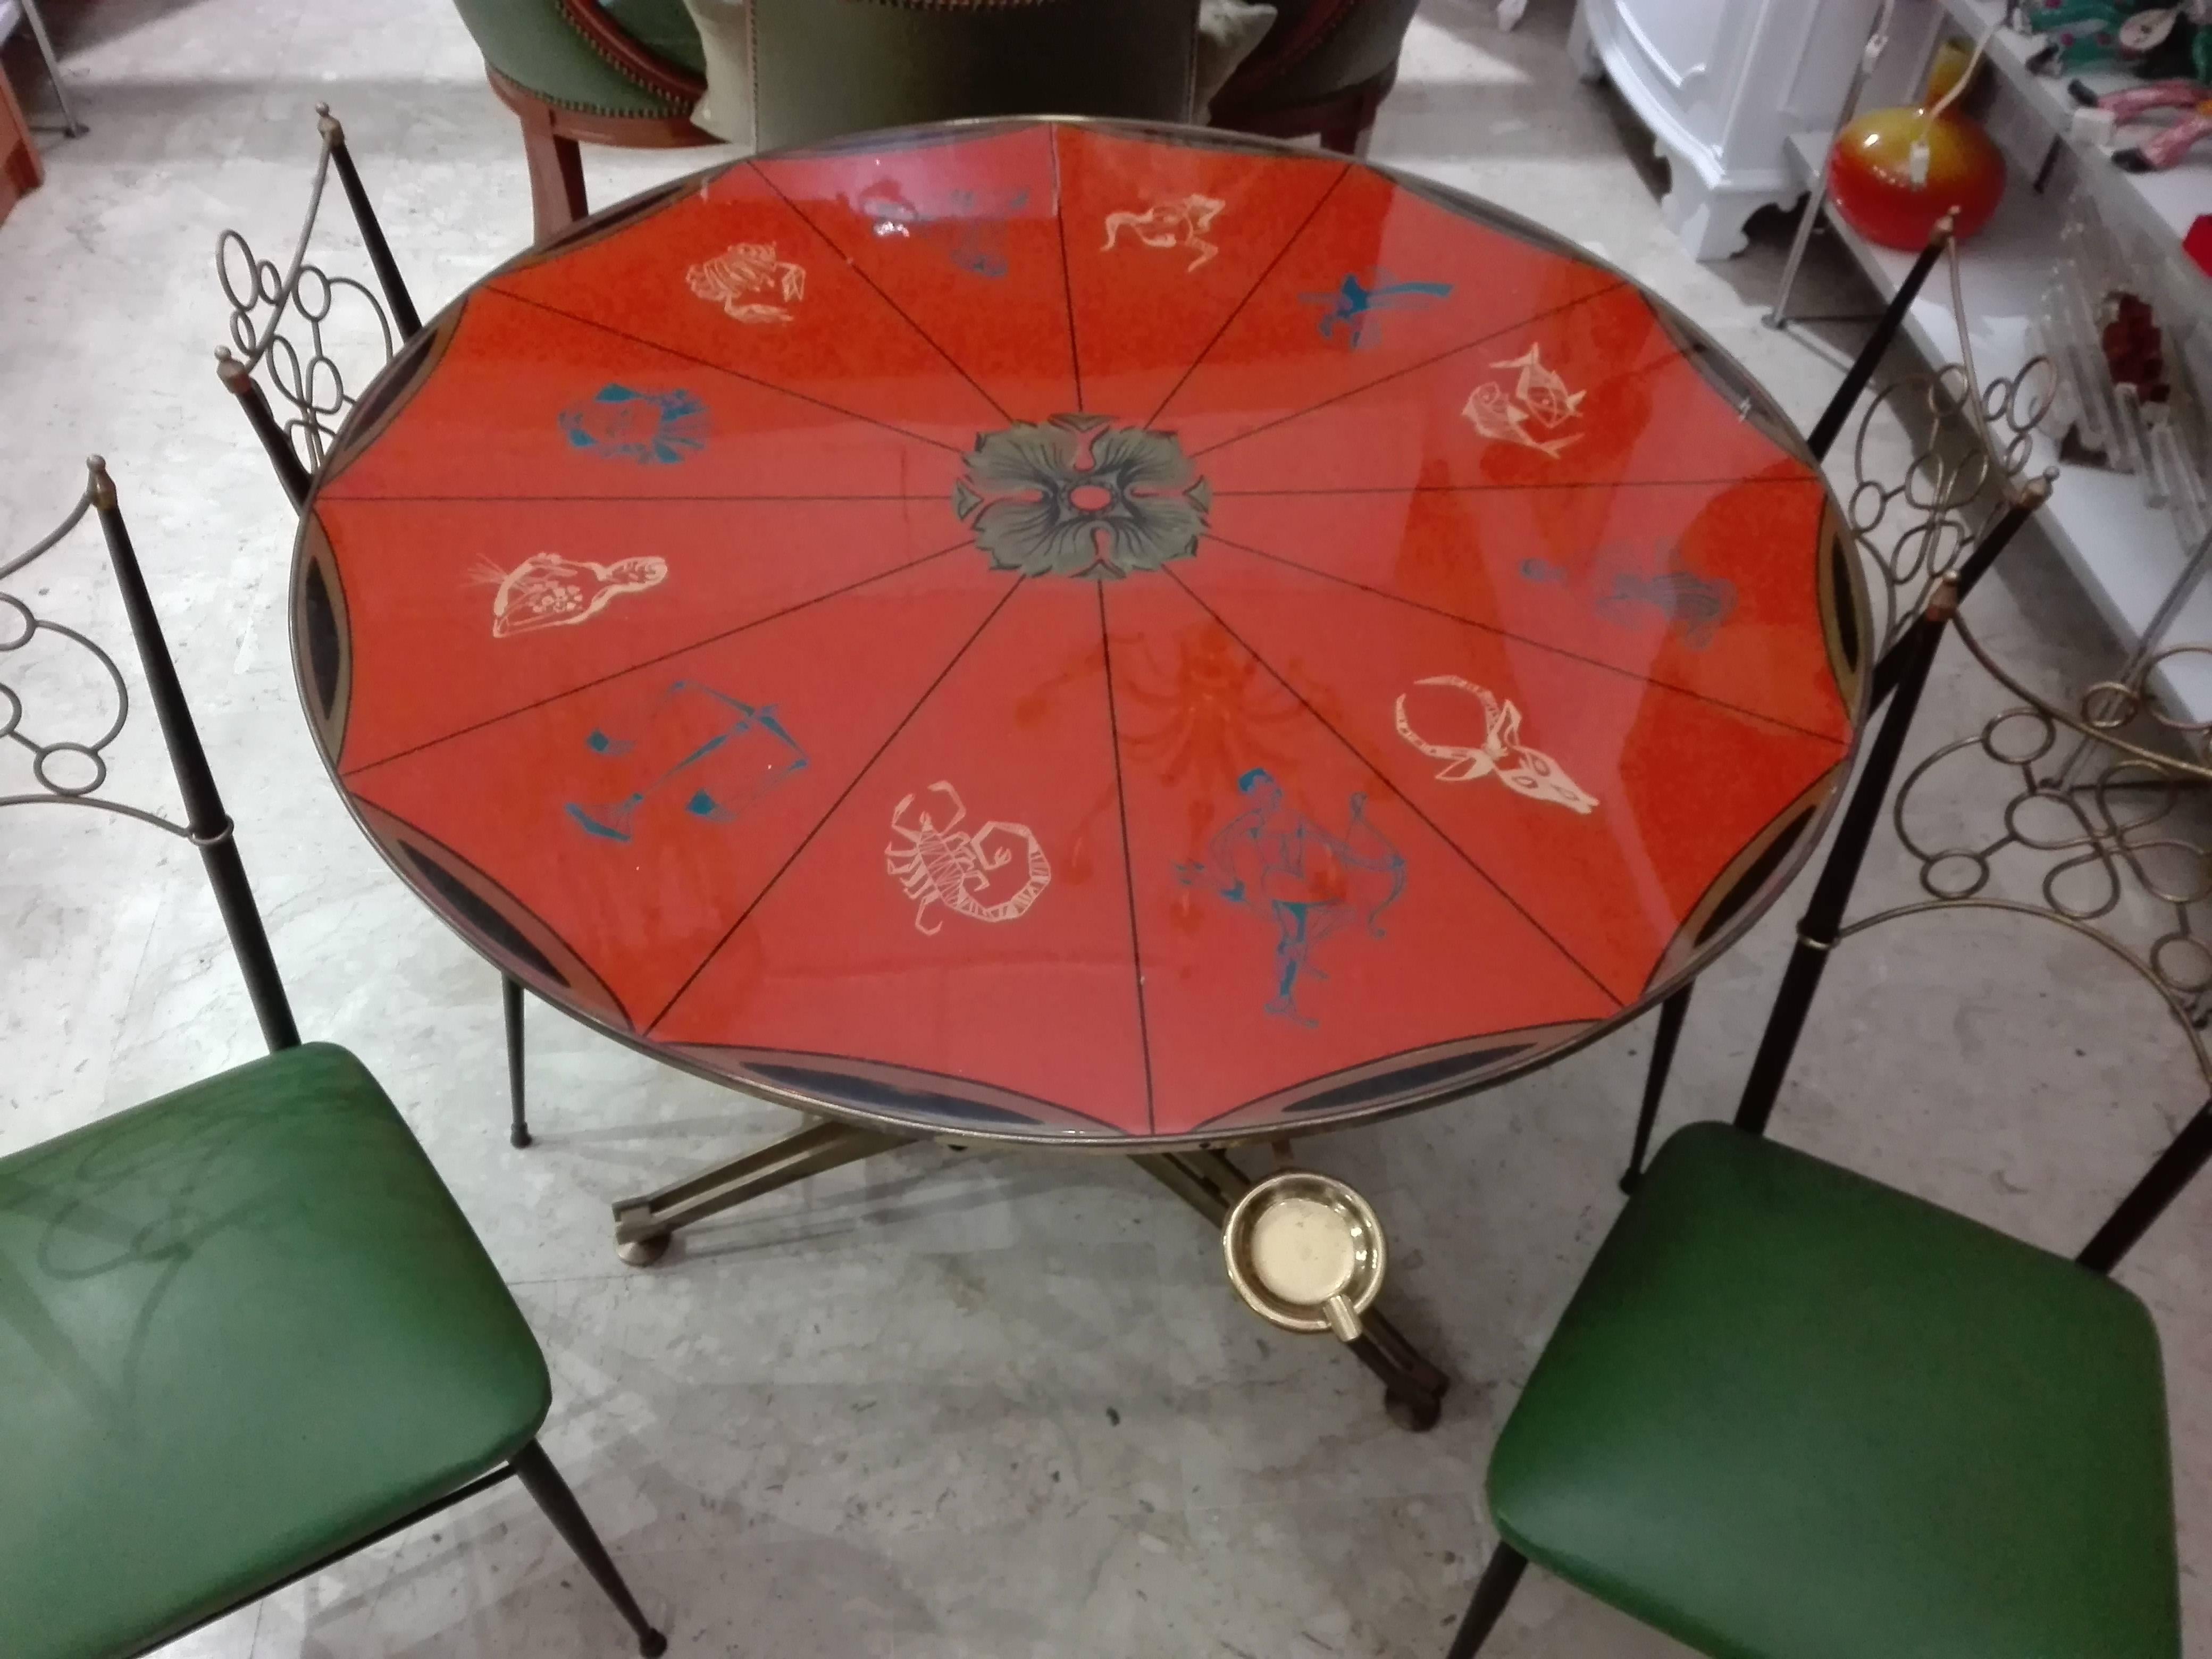 Exceptional round coffee table / game 50 years plan with zodiac signs
Brass feet adjustable in height
Measures: Diameter of the top 100 cm, height 79 cm
Set of four chairs from the 1950s.
Handicraft production - structure in painted metal and